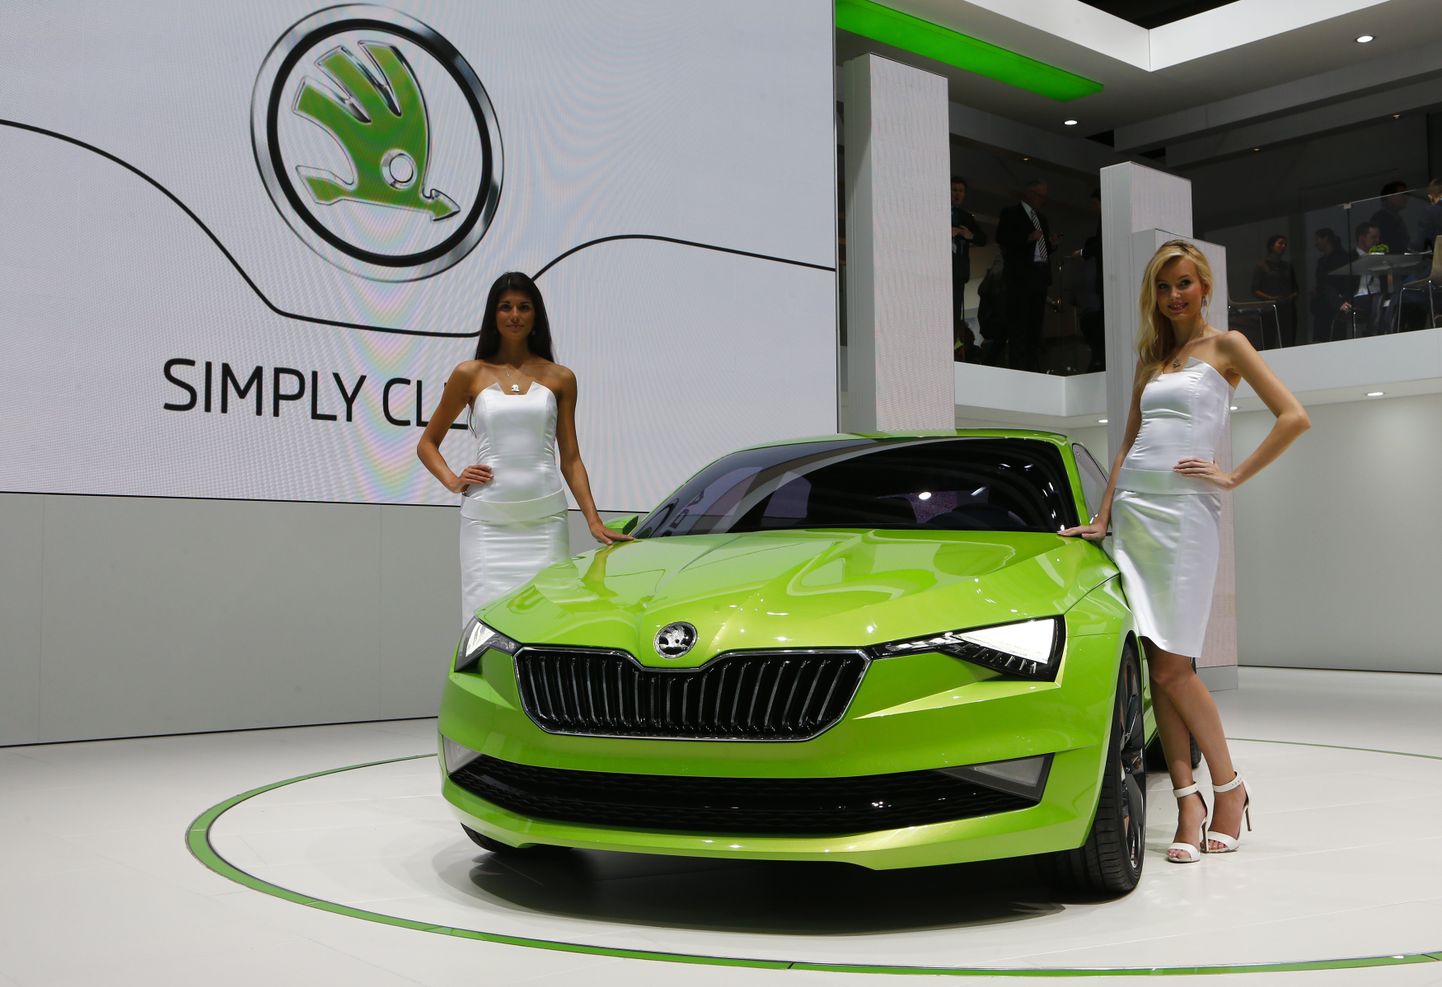 Models pose with Skoda Vision C concept car during the media day ahead of the 84th Geneva Motor Show at the Palexpo Arena in Geneva March 4, 2014. The Geneva Motor Show will run from March 6 to 16.           REUTERS/Arnd Wiegmann (SWITZERLAND  - Tags: TRANSPORT BUSINESS)